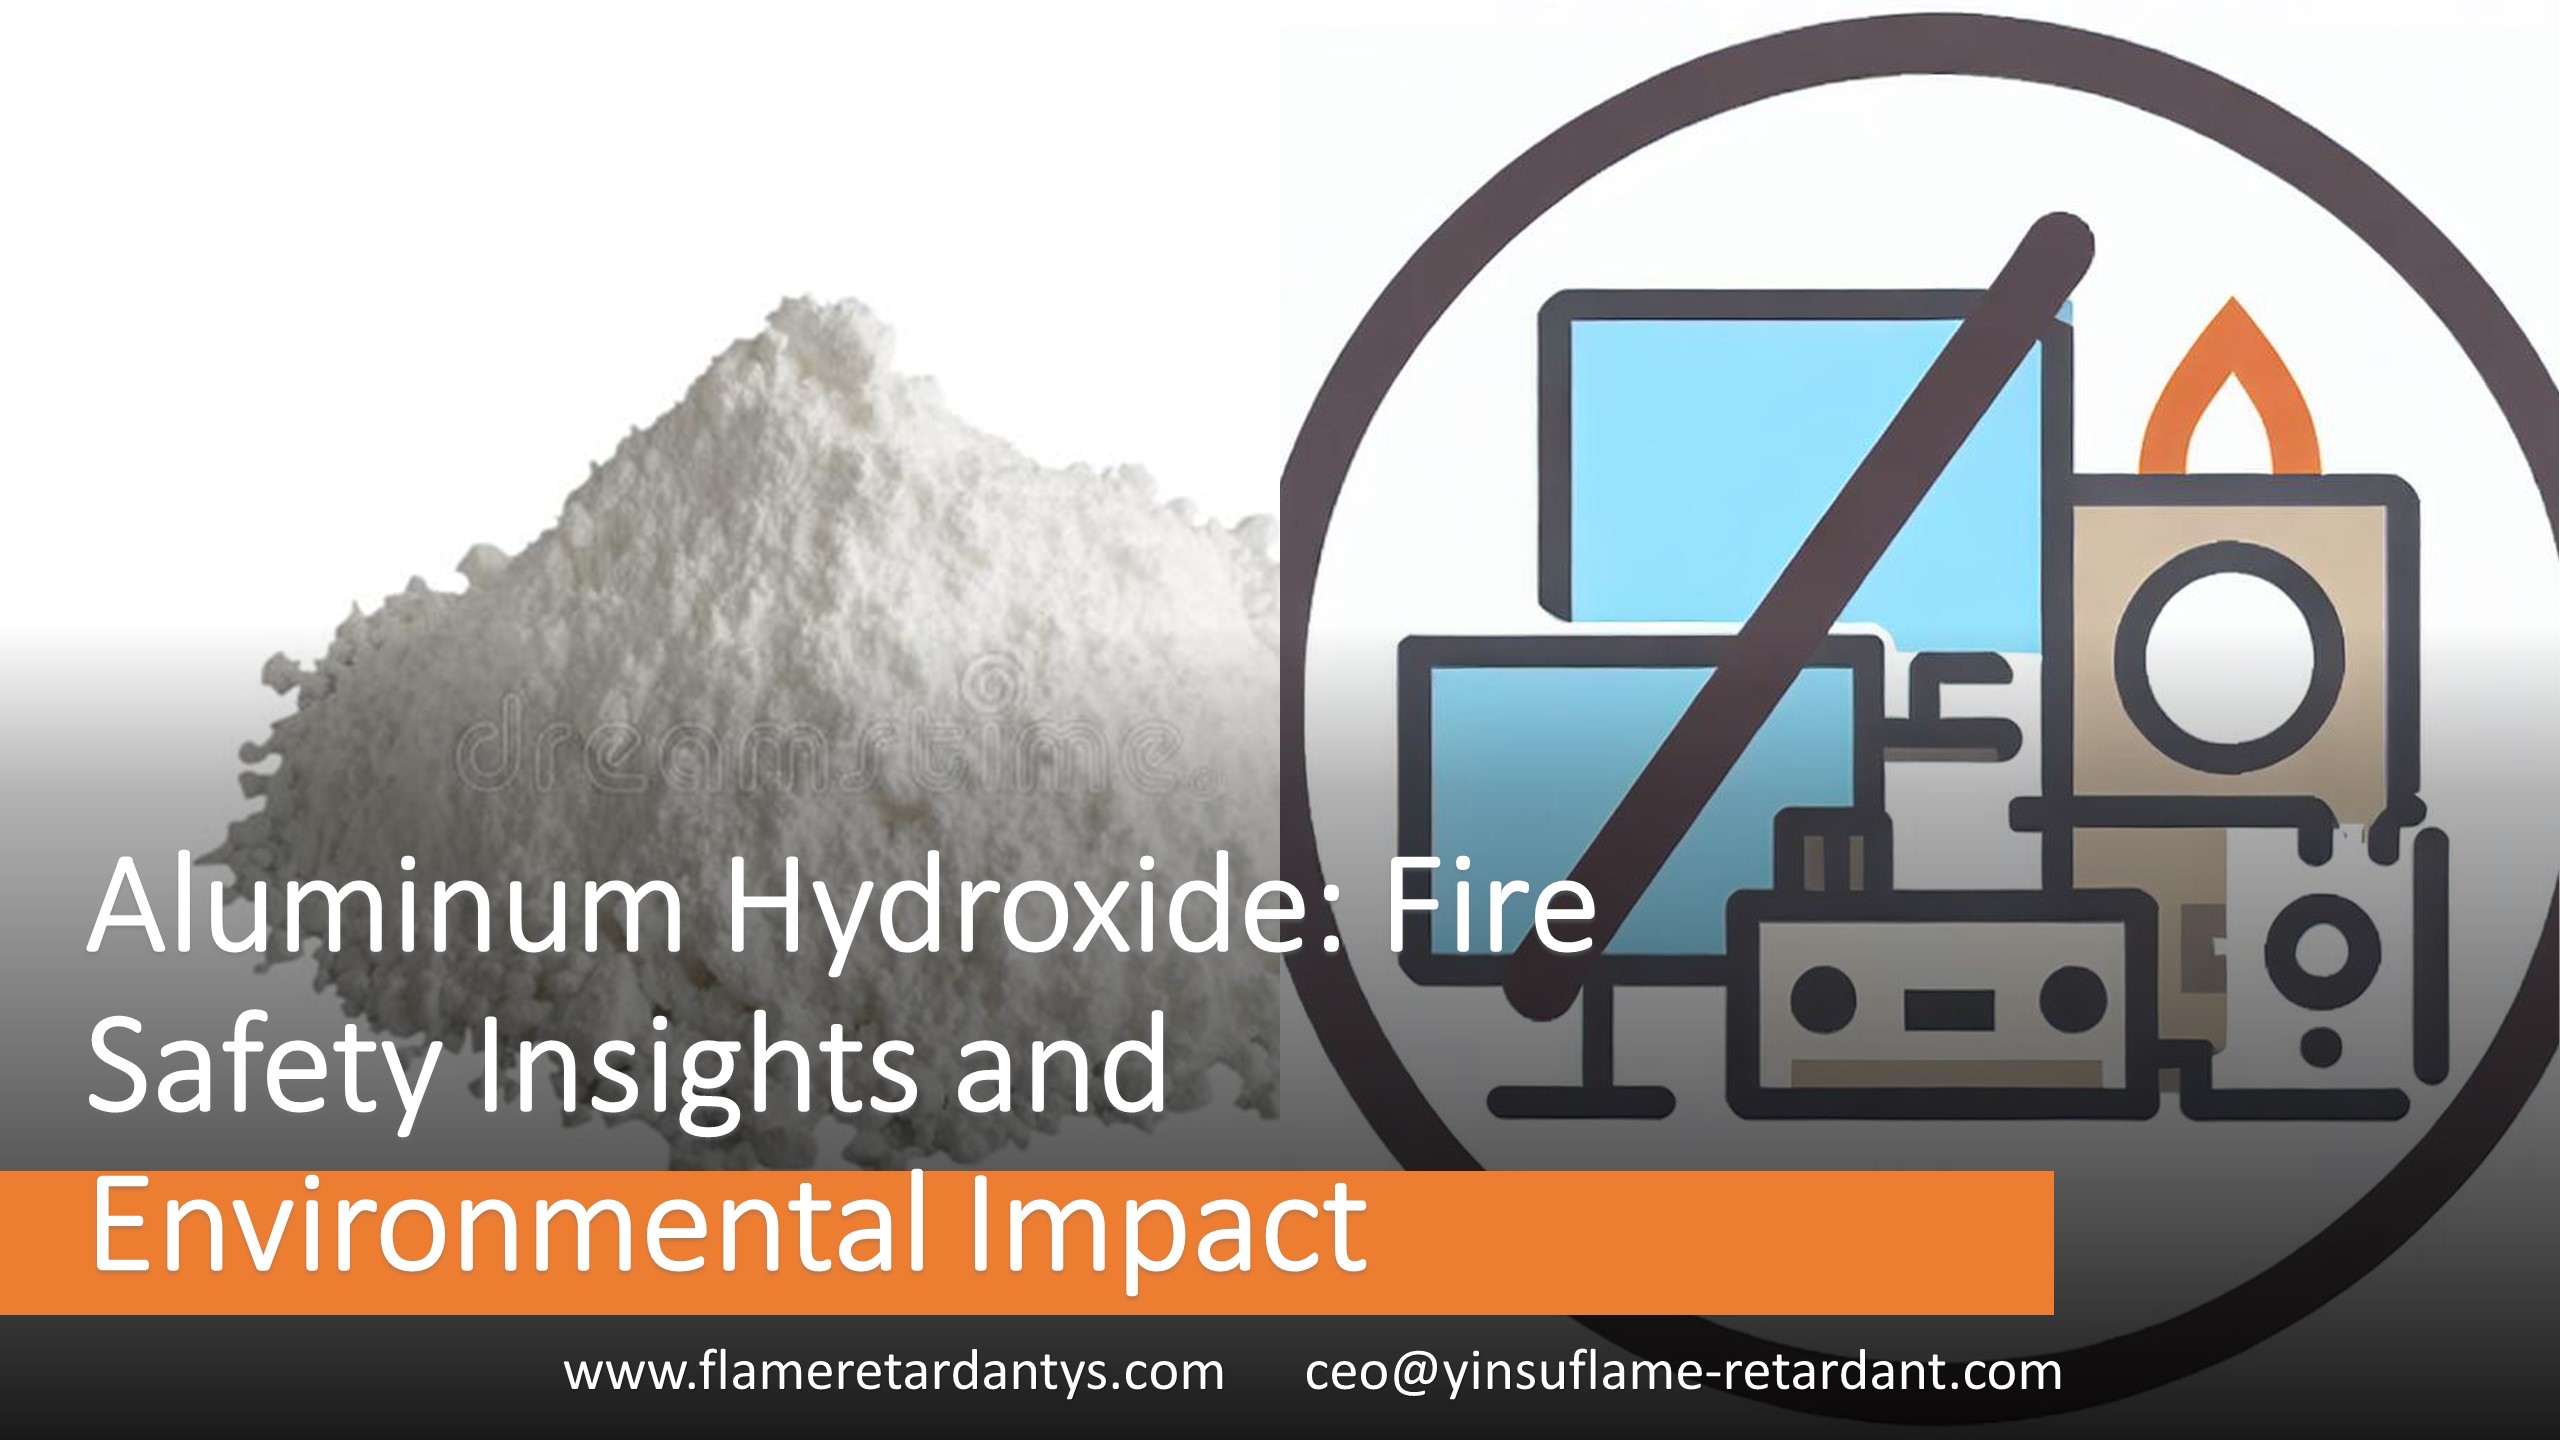 Aluminum Hydroxide: Fire Safety Insights And Environmental Impact